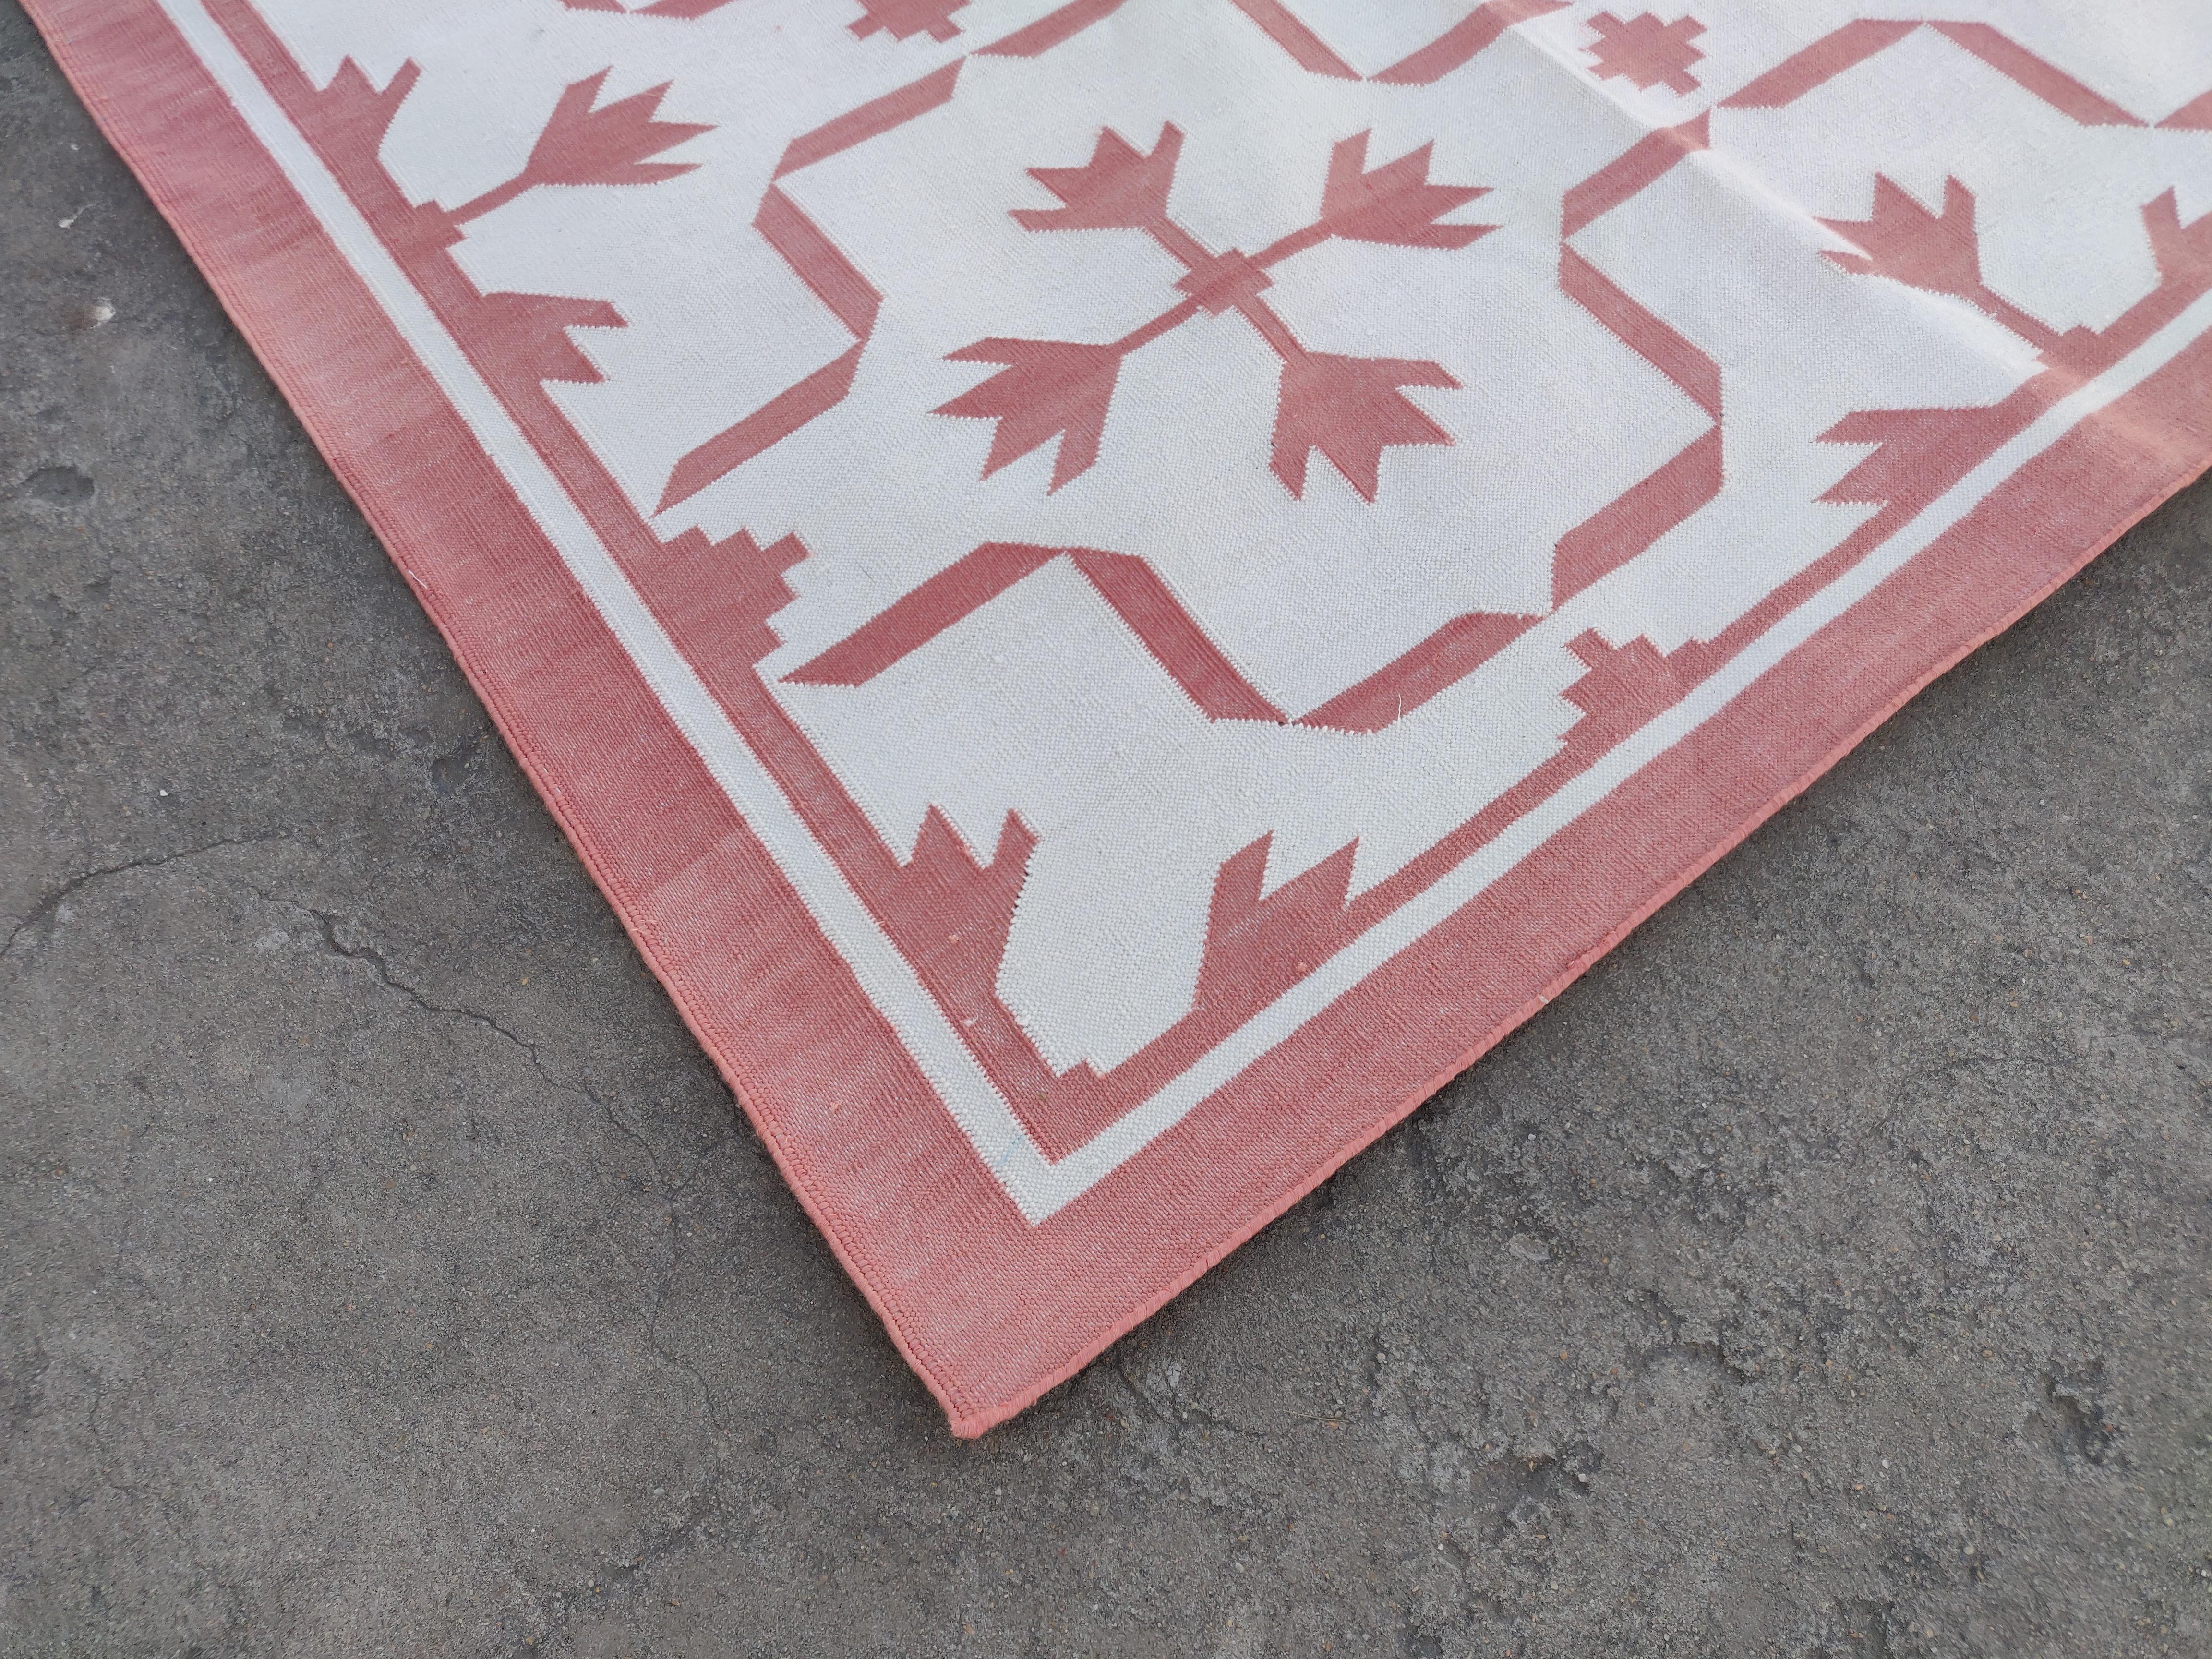 Cotton Vegetable Dyed Reversible Rose Pink And White Leaf Patterned Indian Rug - 8'x10'
These special flat-weave dhurries are hand-woven with 15 ply 100% cotton yarn. Due to the special manufacturing techniques used to create our rugs, the size and